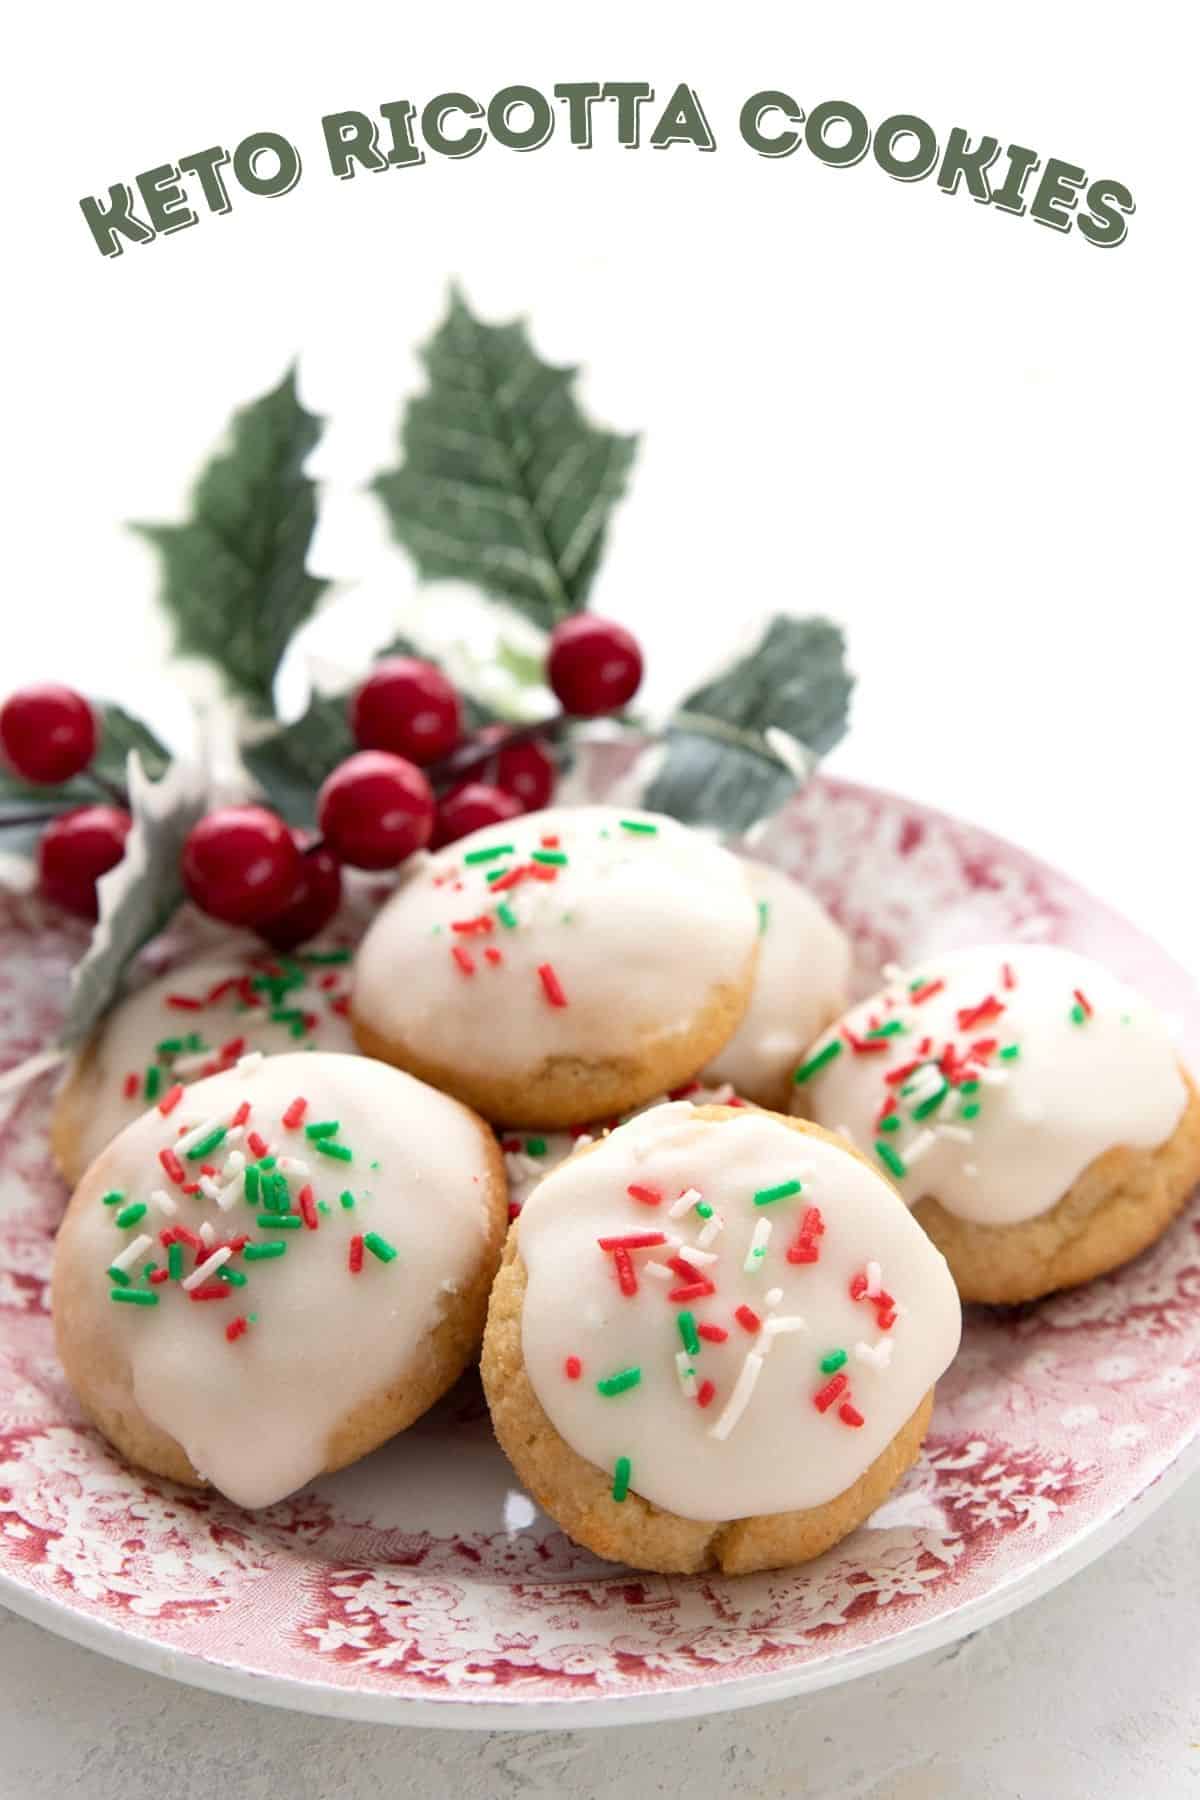 Titled image: Keto Ricotta Cookies on a red patterned plate with holly in the background.